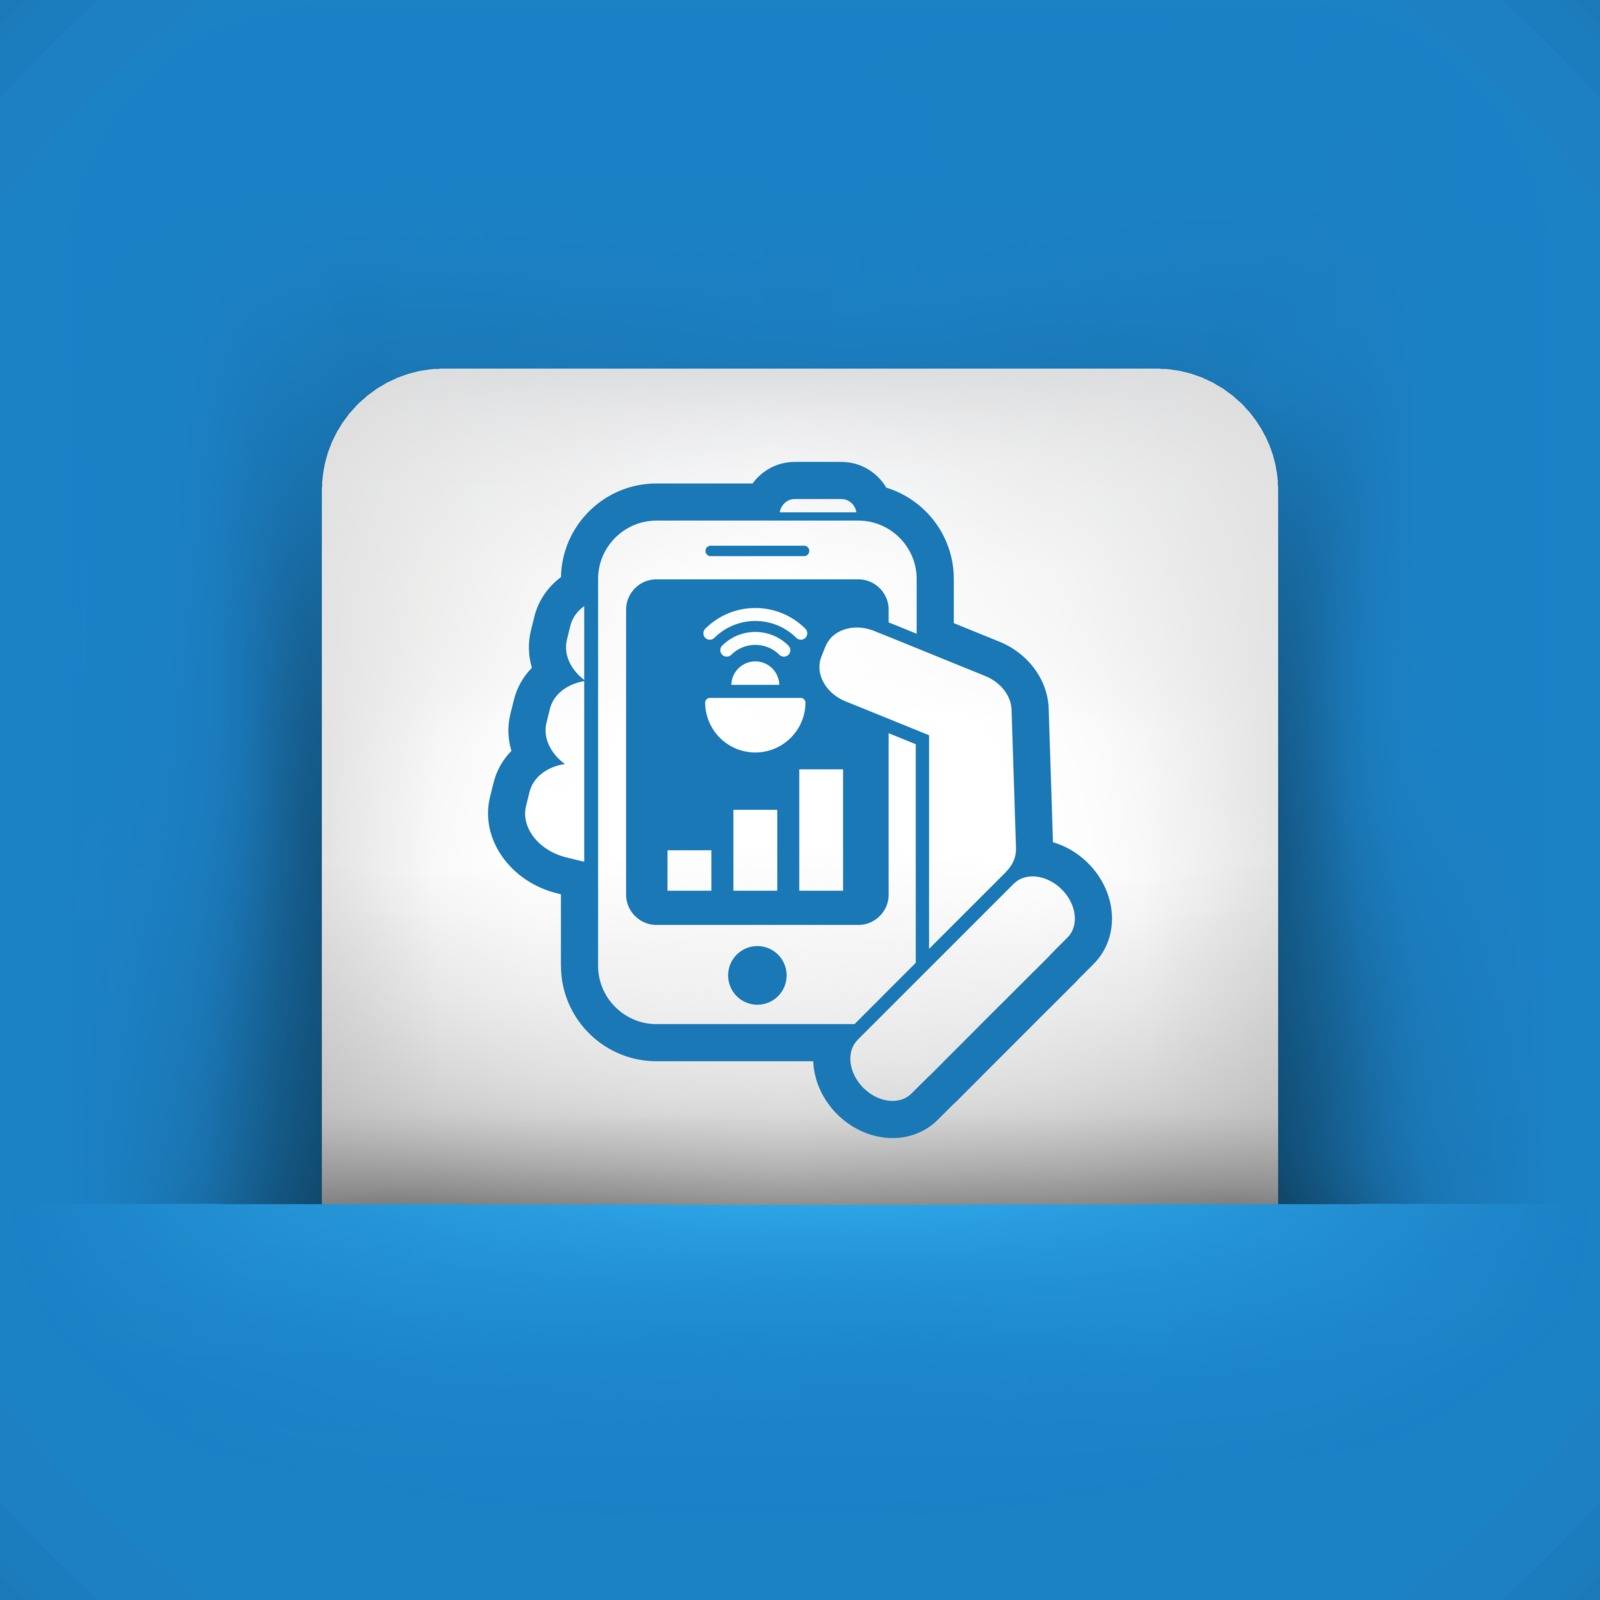 Smartphone connection icon by myVector